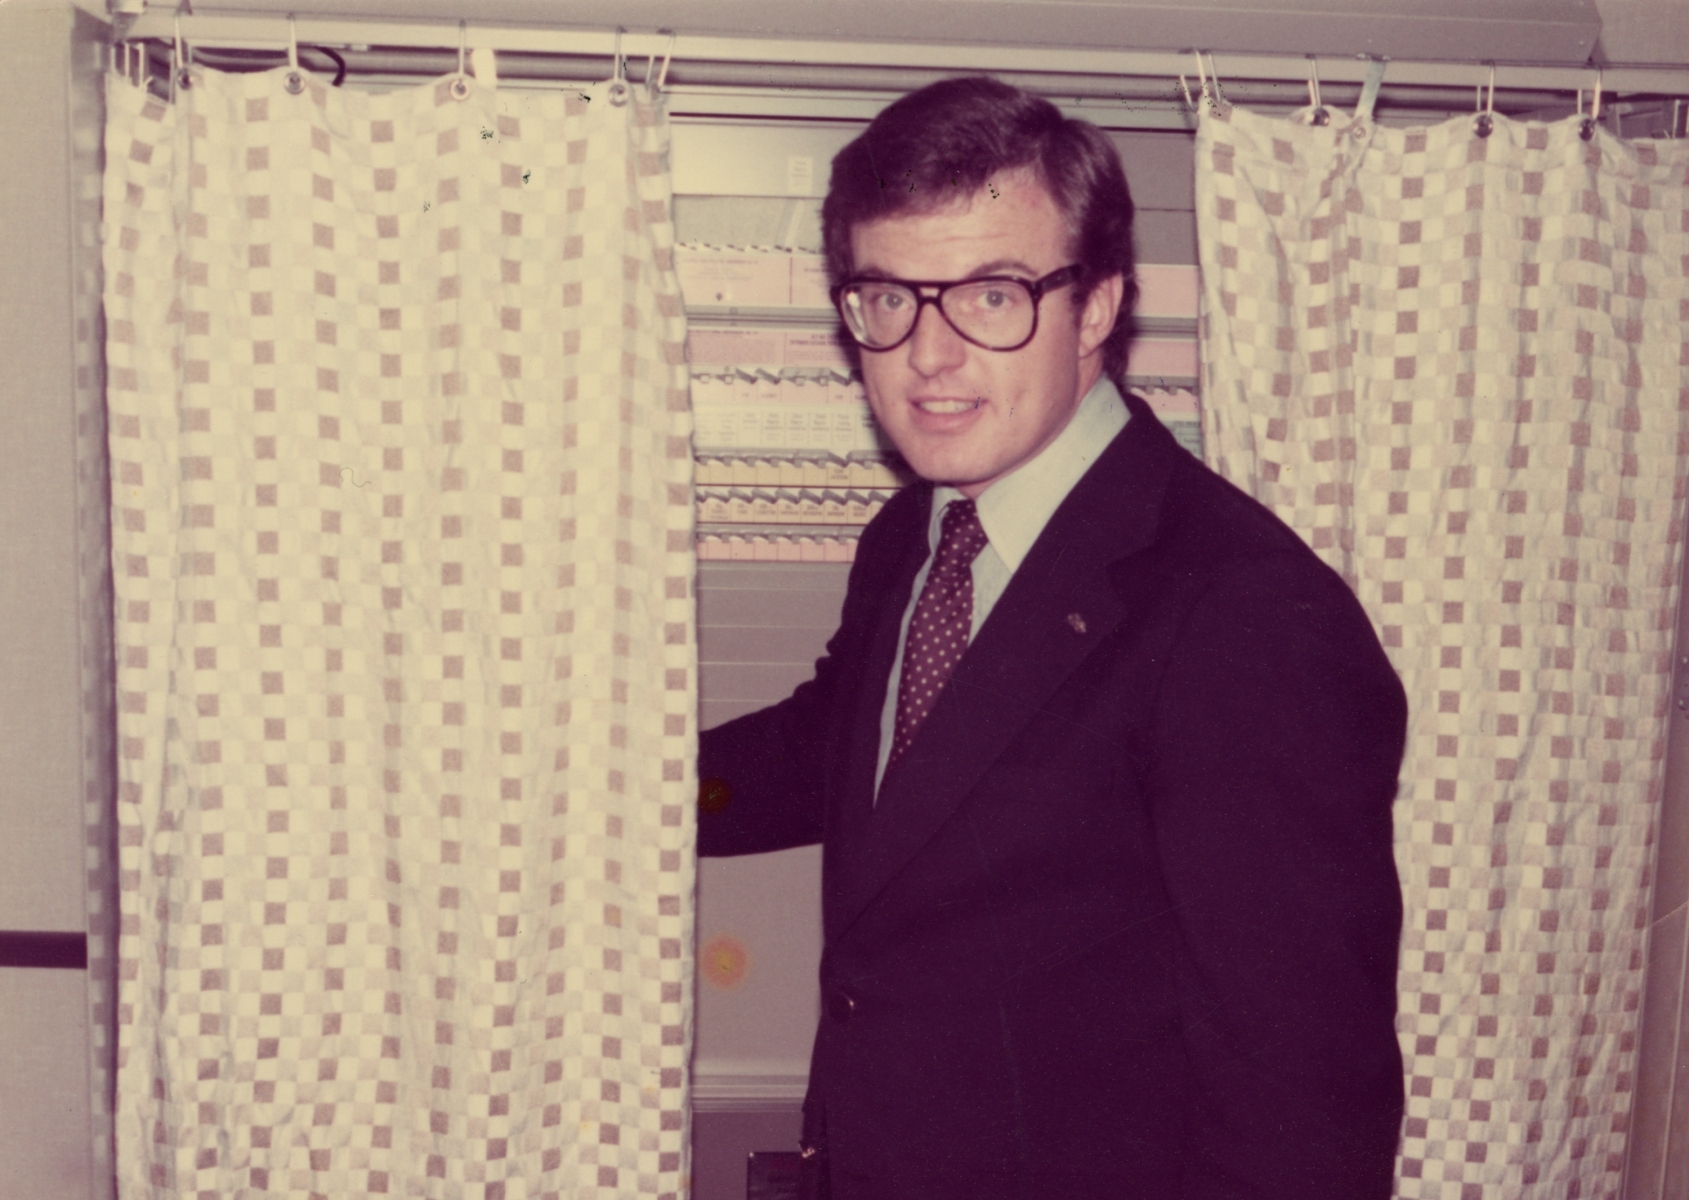 Jim Guy Tucker in a voting booth, 1976